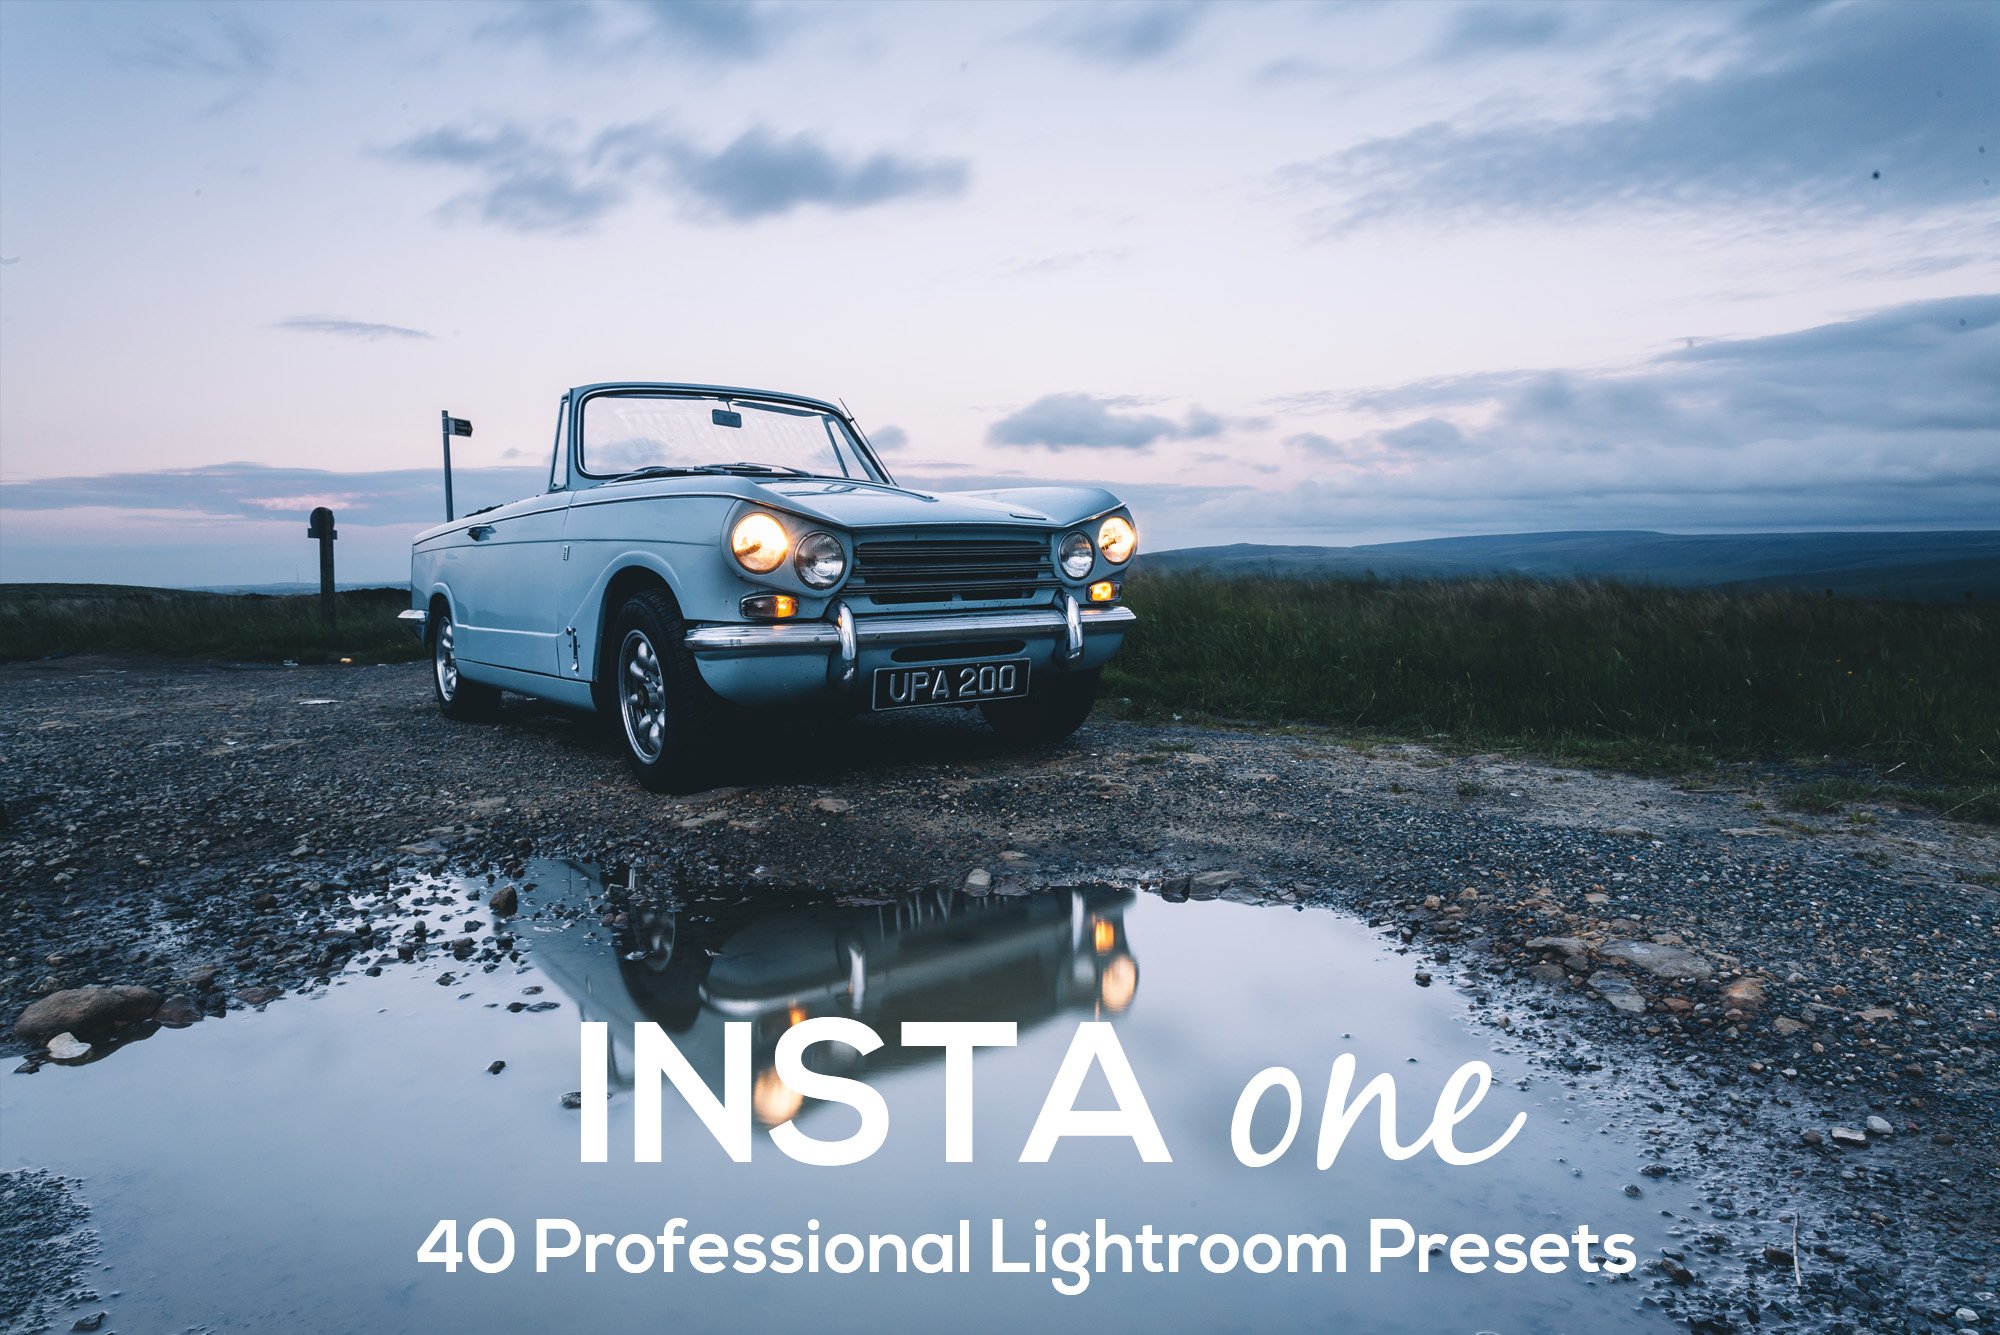 InstaOne Lightroom Presetscover image.